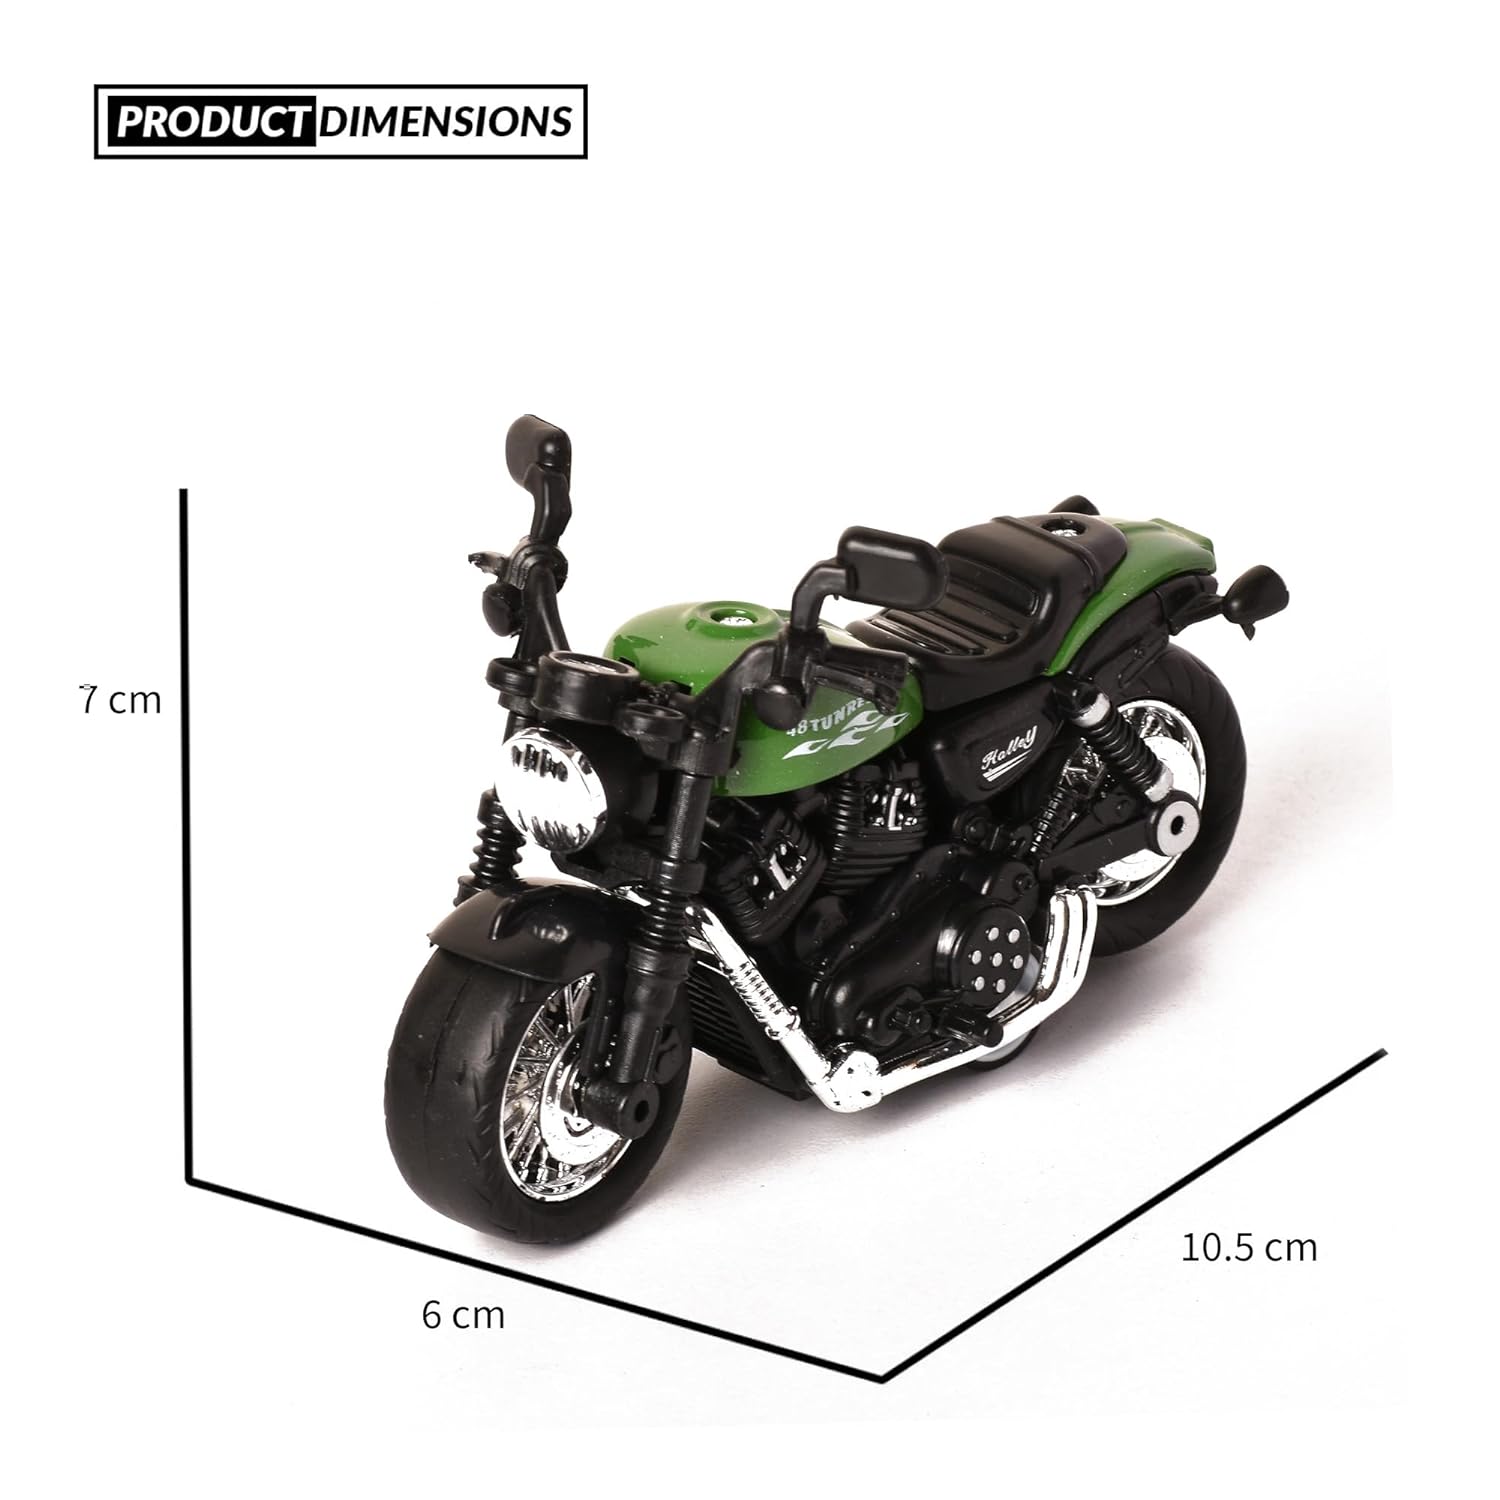 Braintastic Model Diecast Metal Bike Toy Vehicle Pull Back Friction Car with Openable Doors Light & Music Toys for Kids Age 3+ Years (Royal Enfield Green)